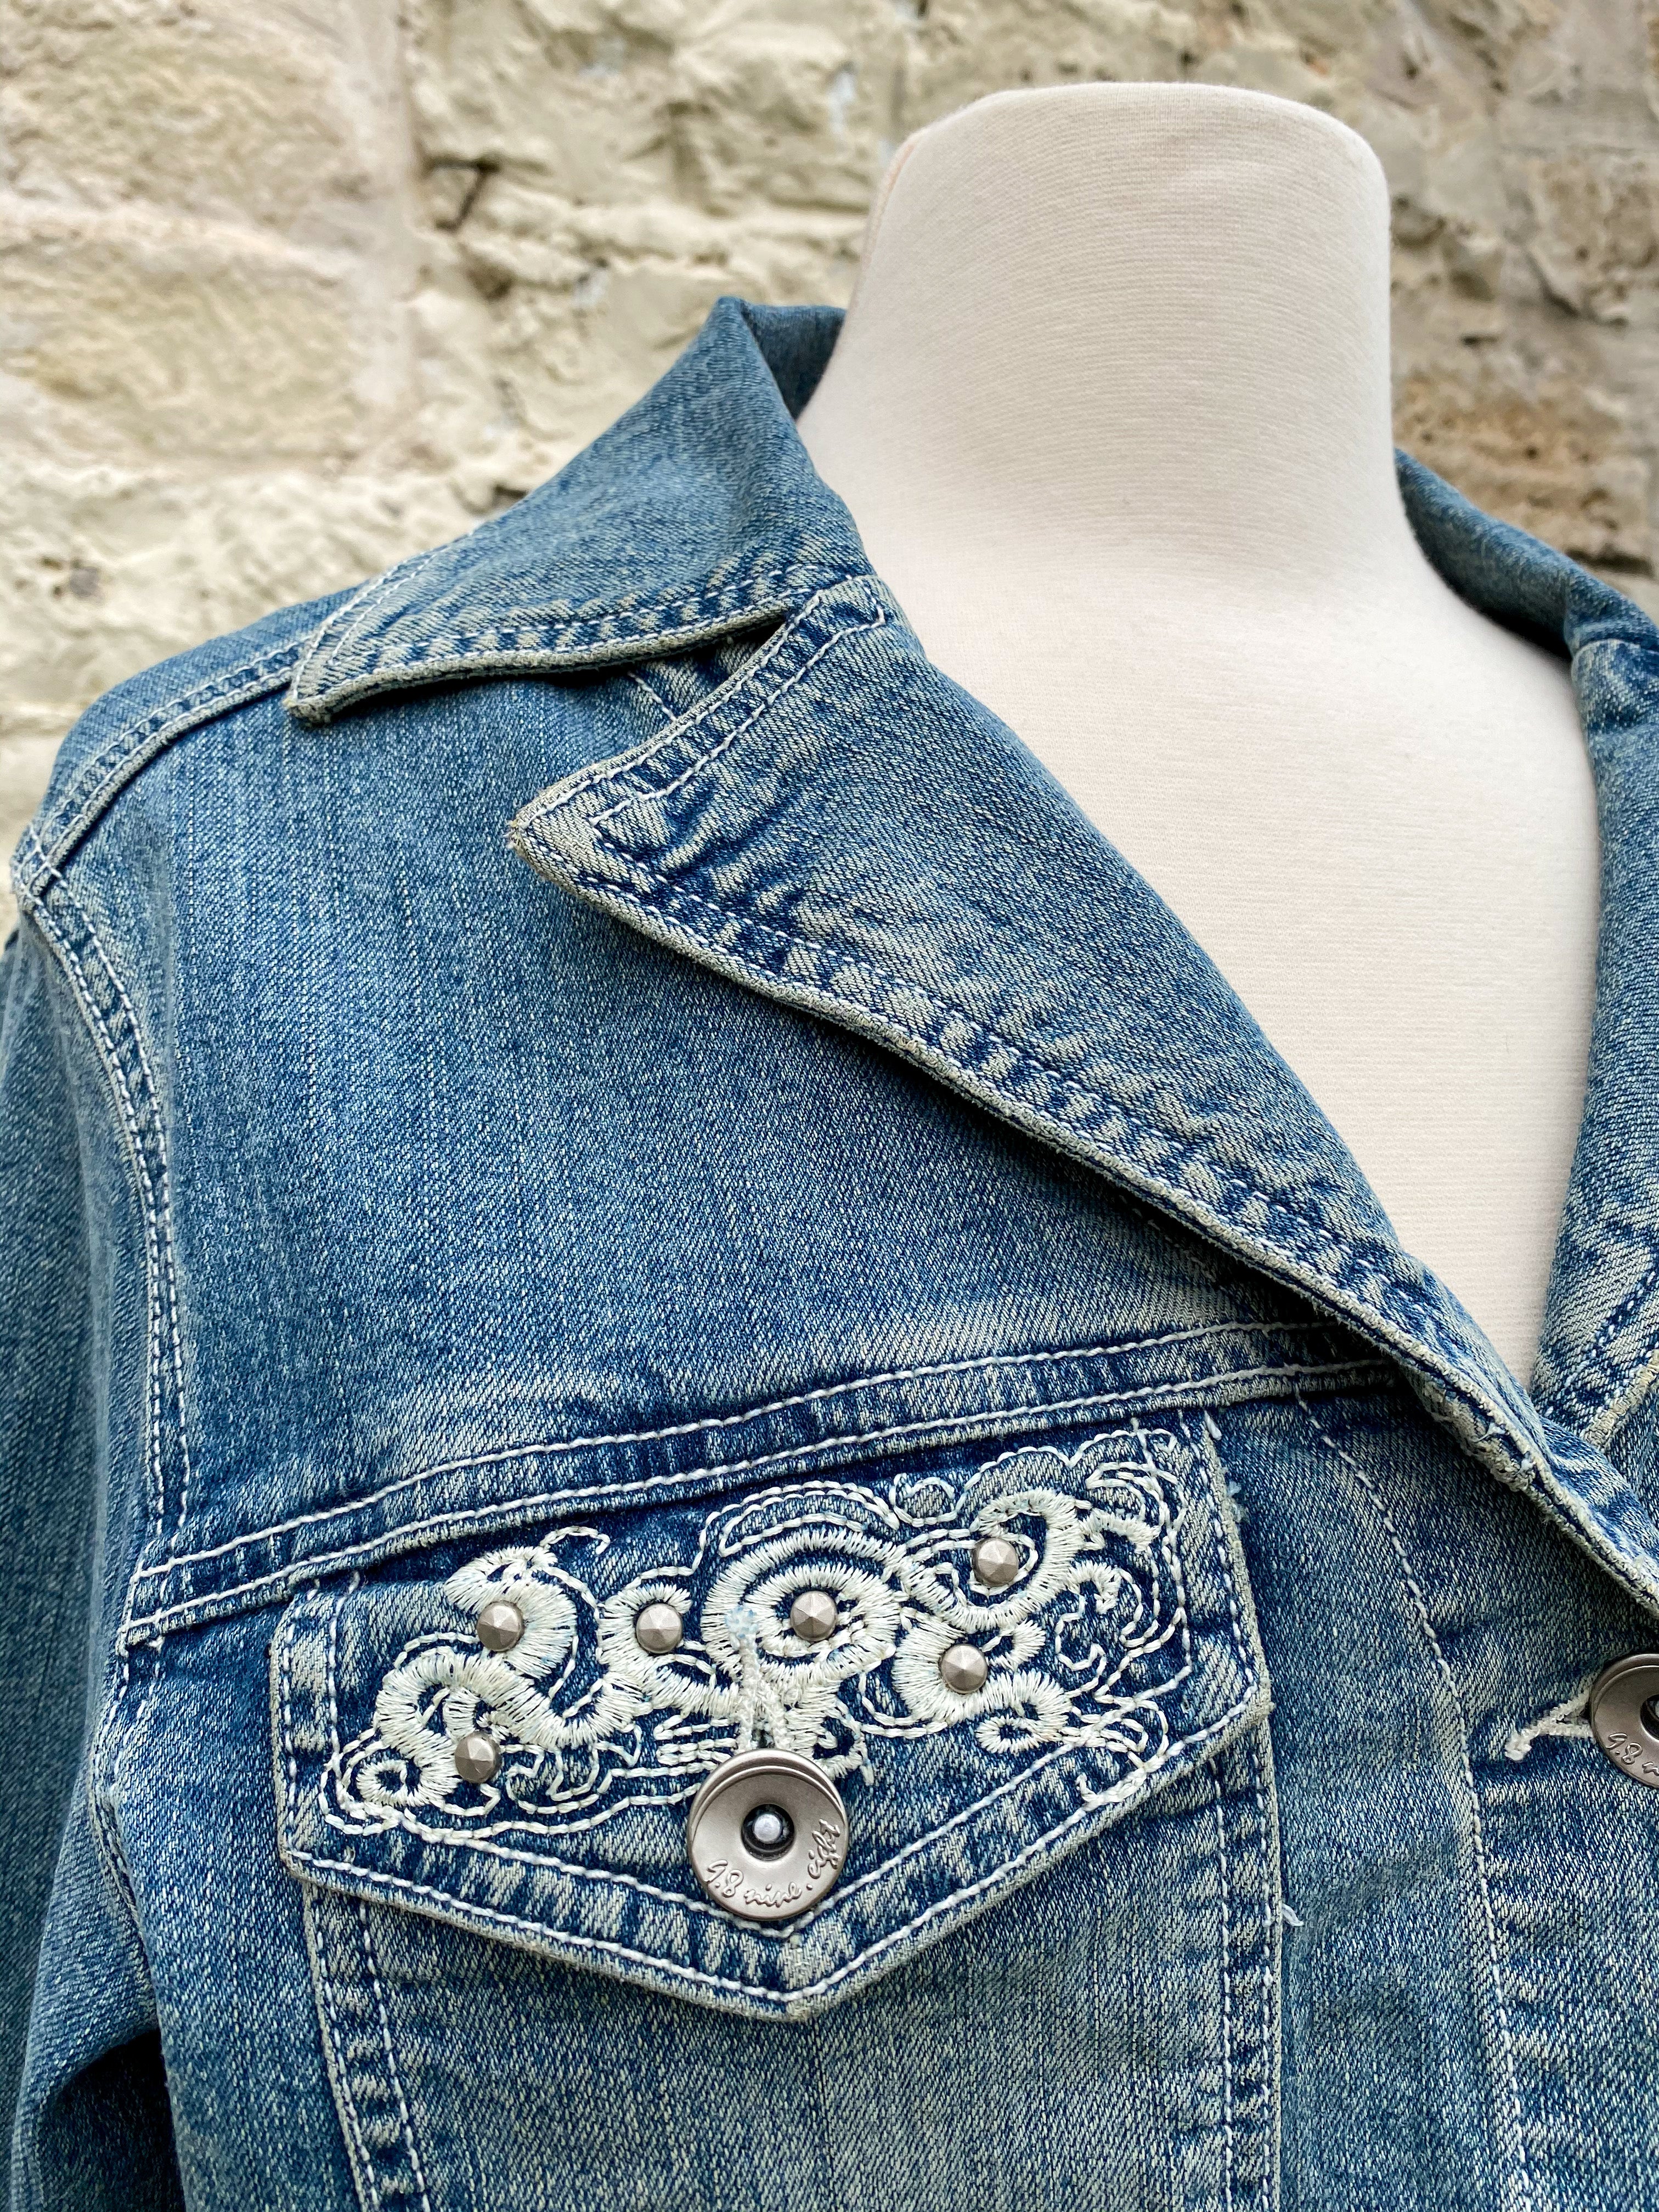 Denim and Lace Upcycled Victorian Jacket -XL